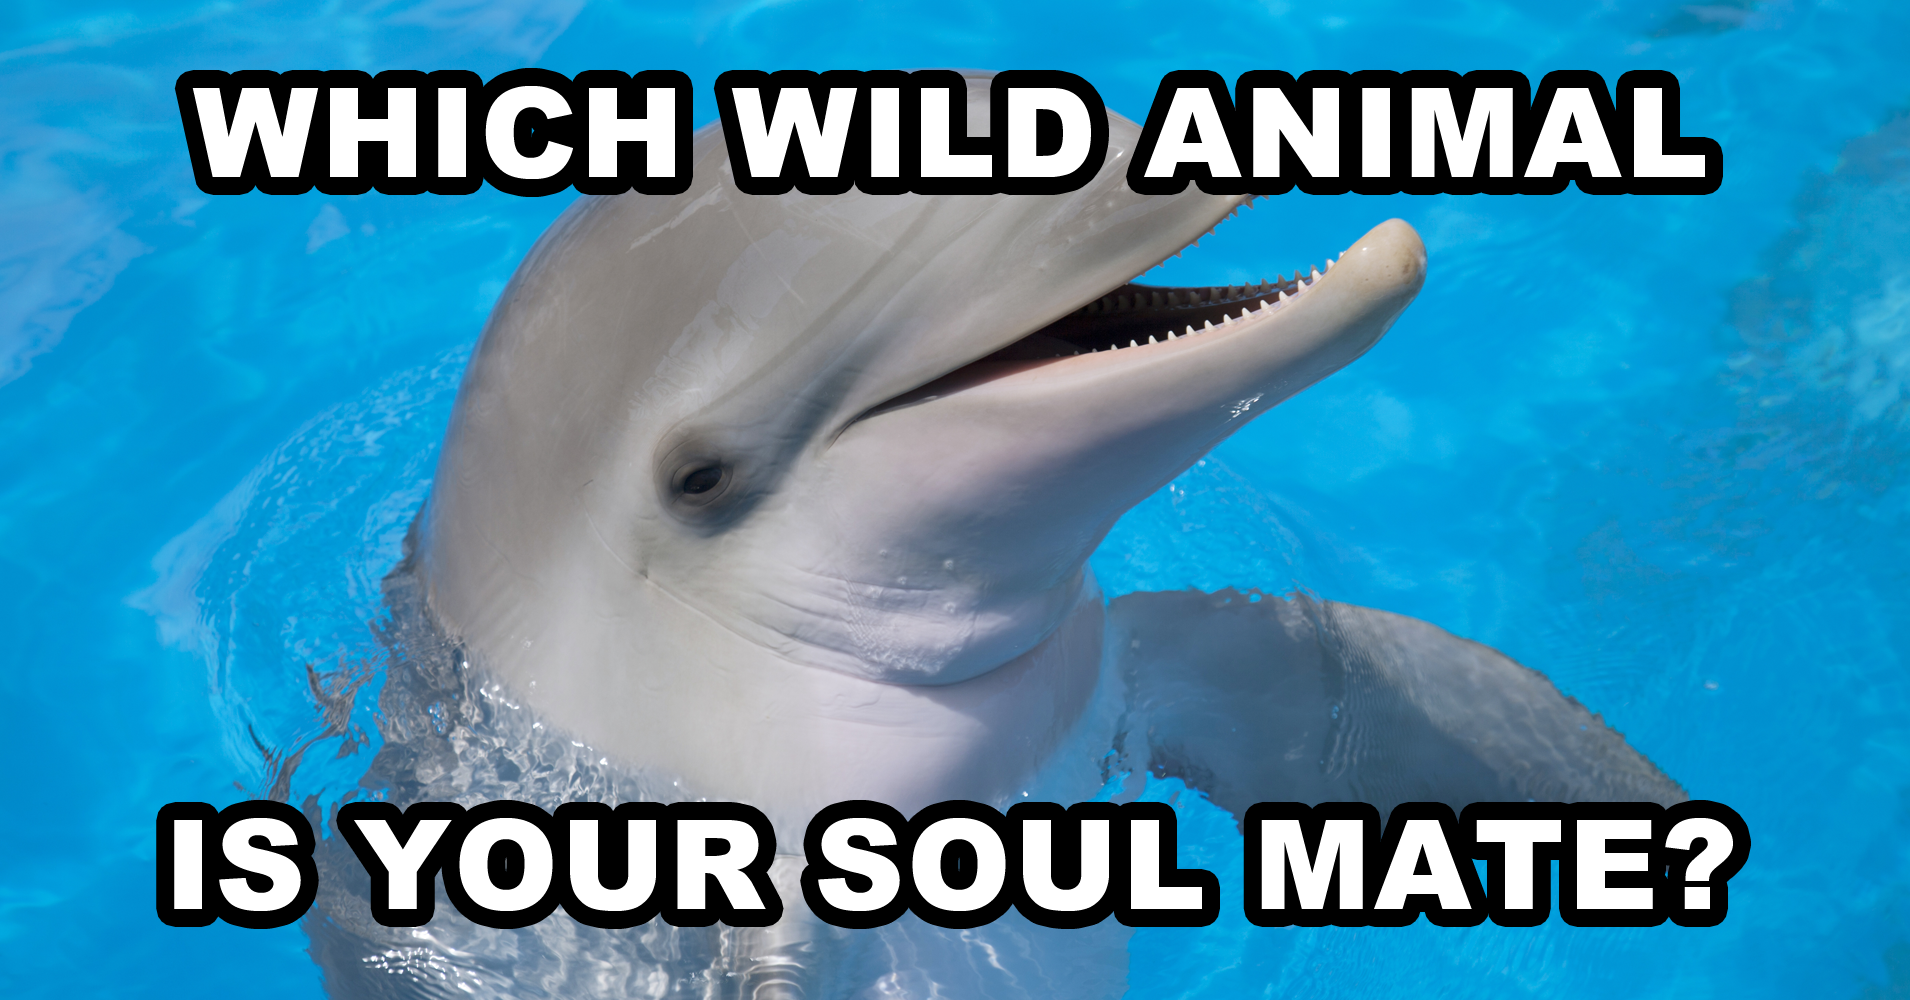 Which Wild Animal Is Your Soul Mate? - Quiz 